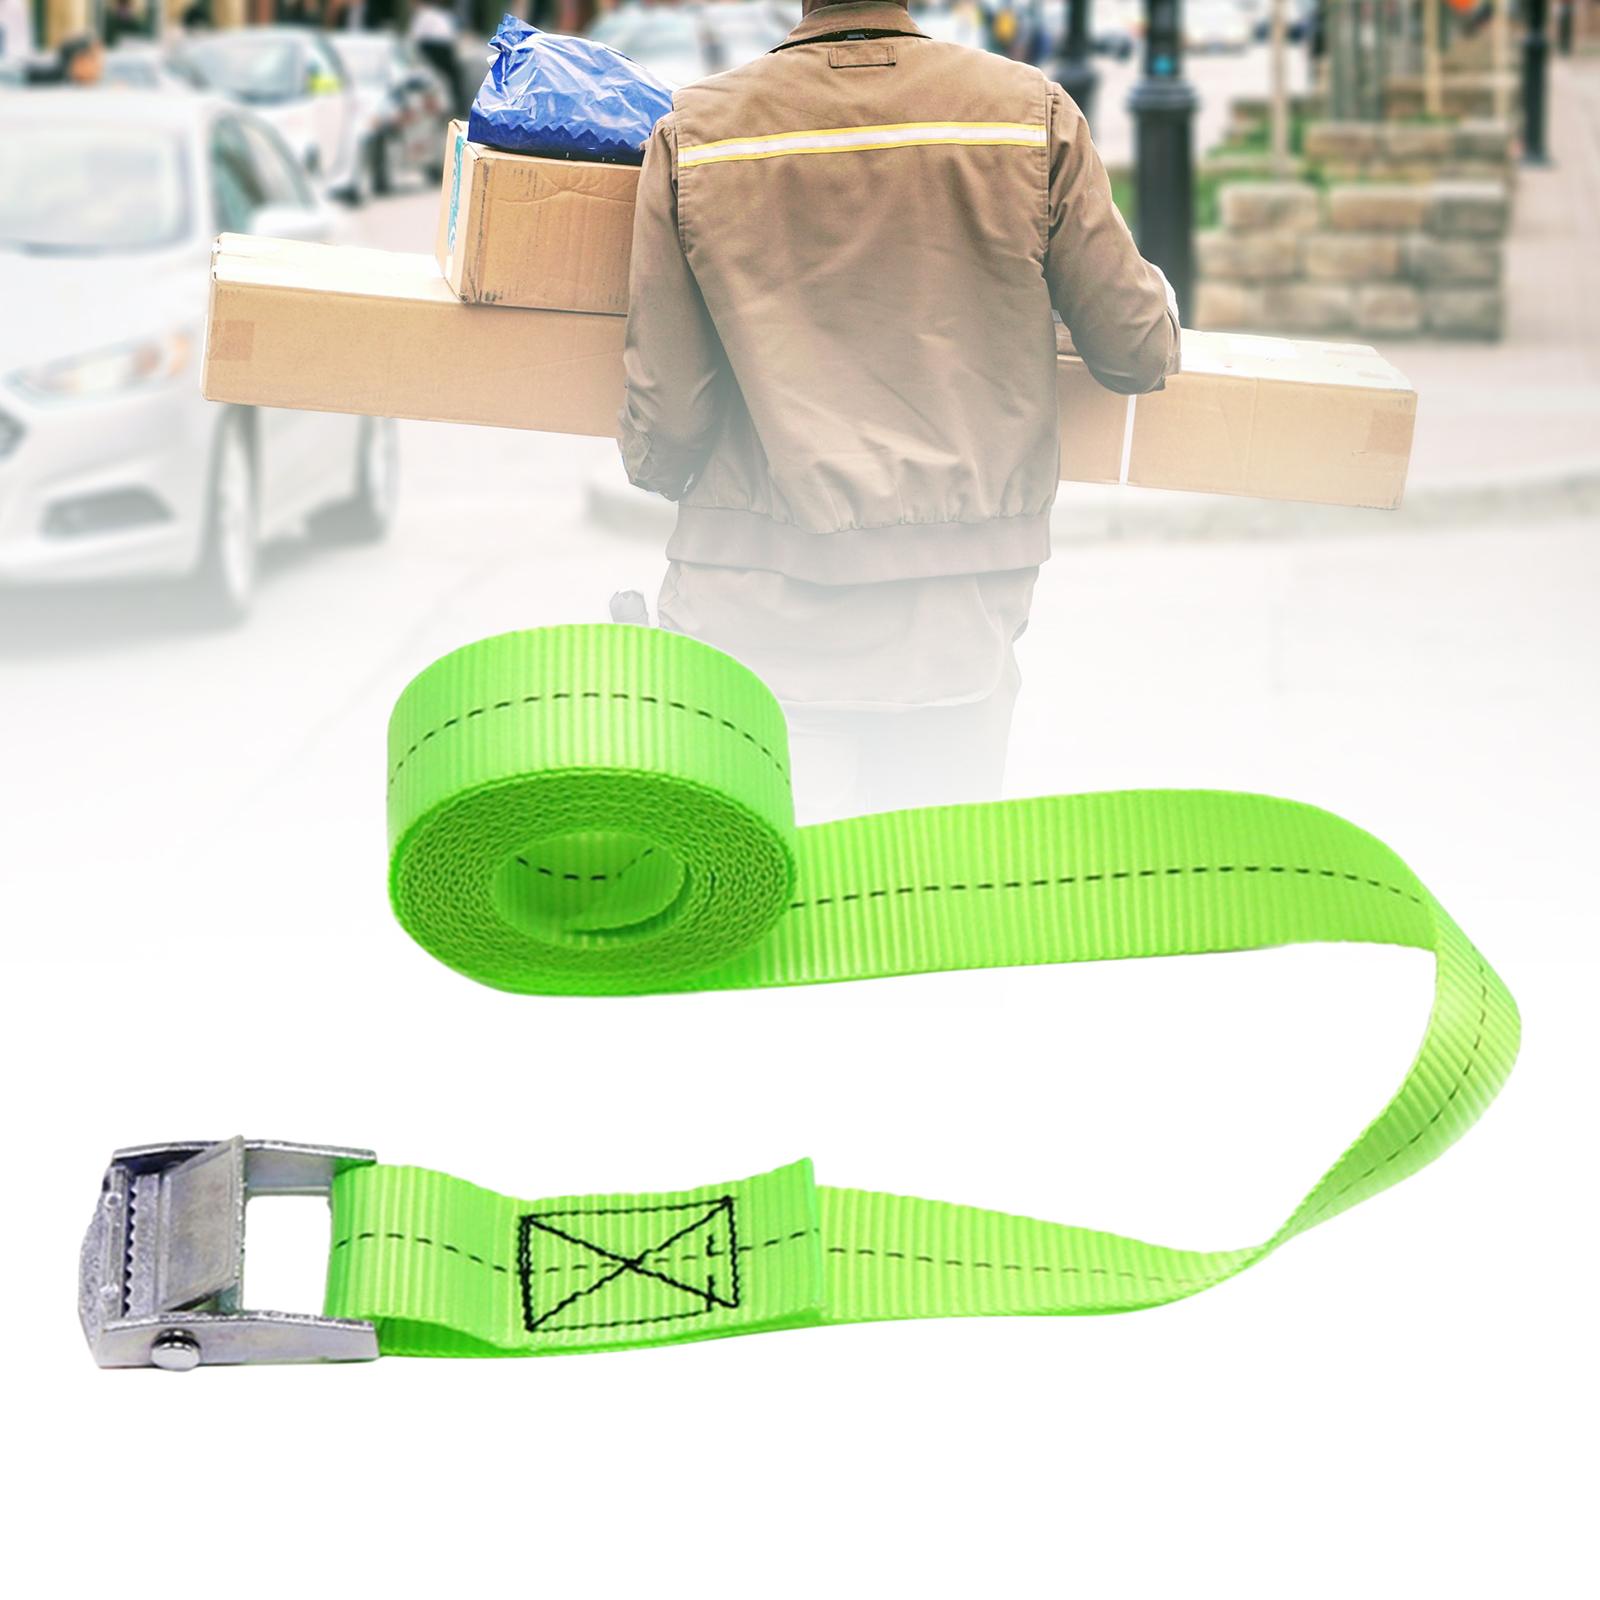 Luggage Strap Travel Luminous Lashing Straps for Traveling Outdoor Trips 59inch